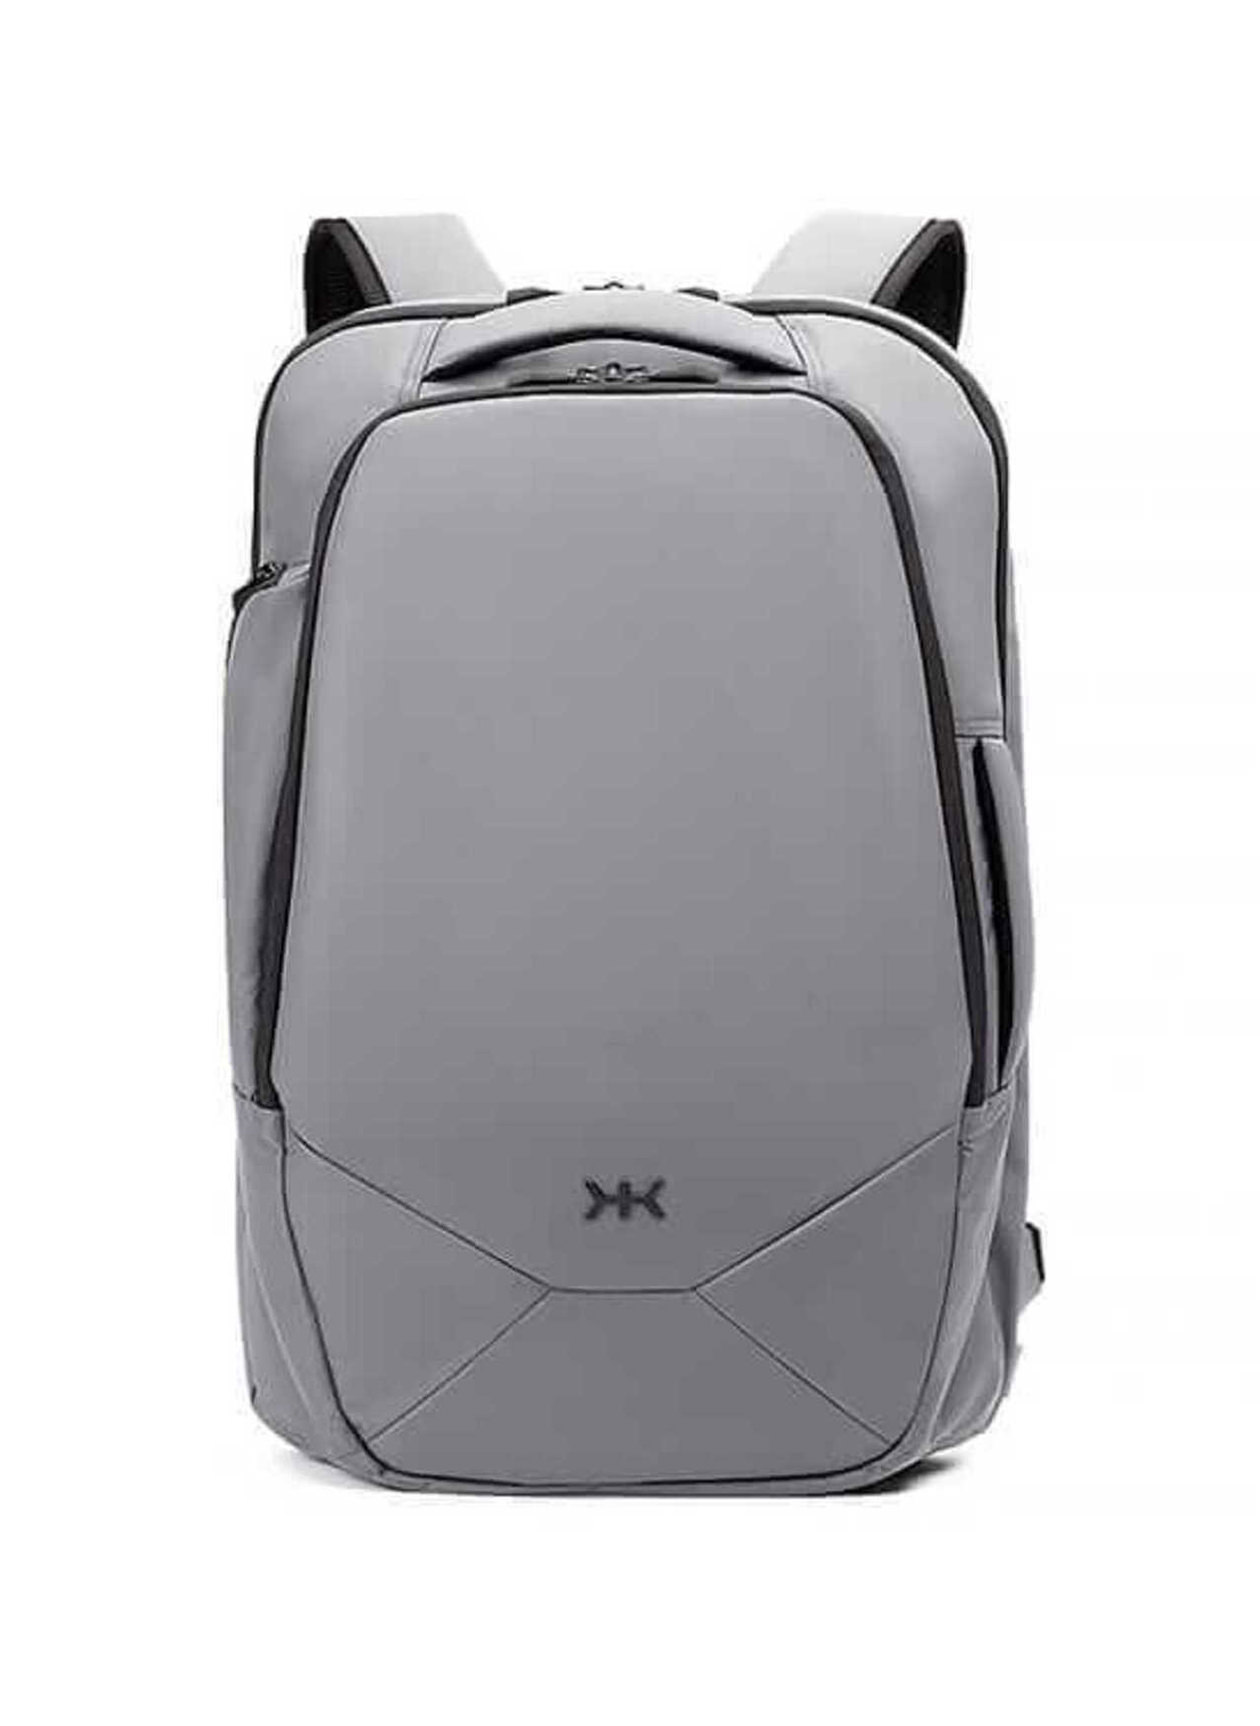 KNACK Alloy Grey Series 2: Large Expandable Pack